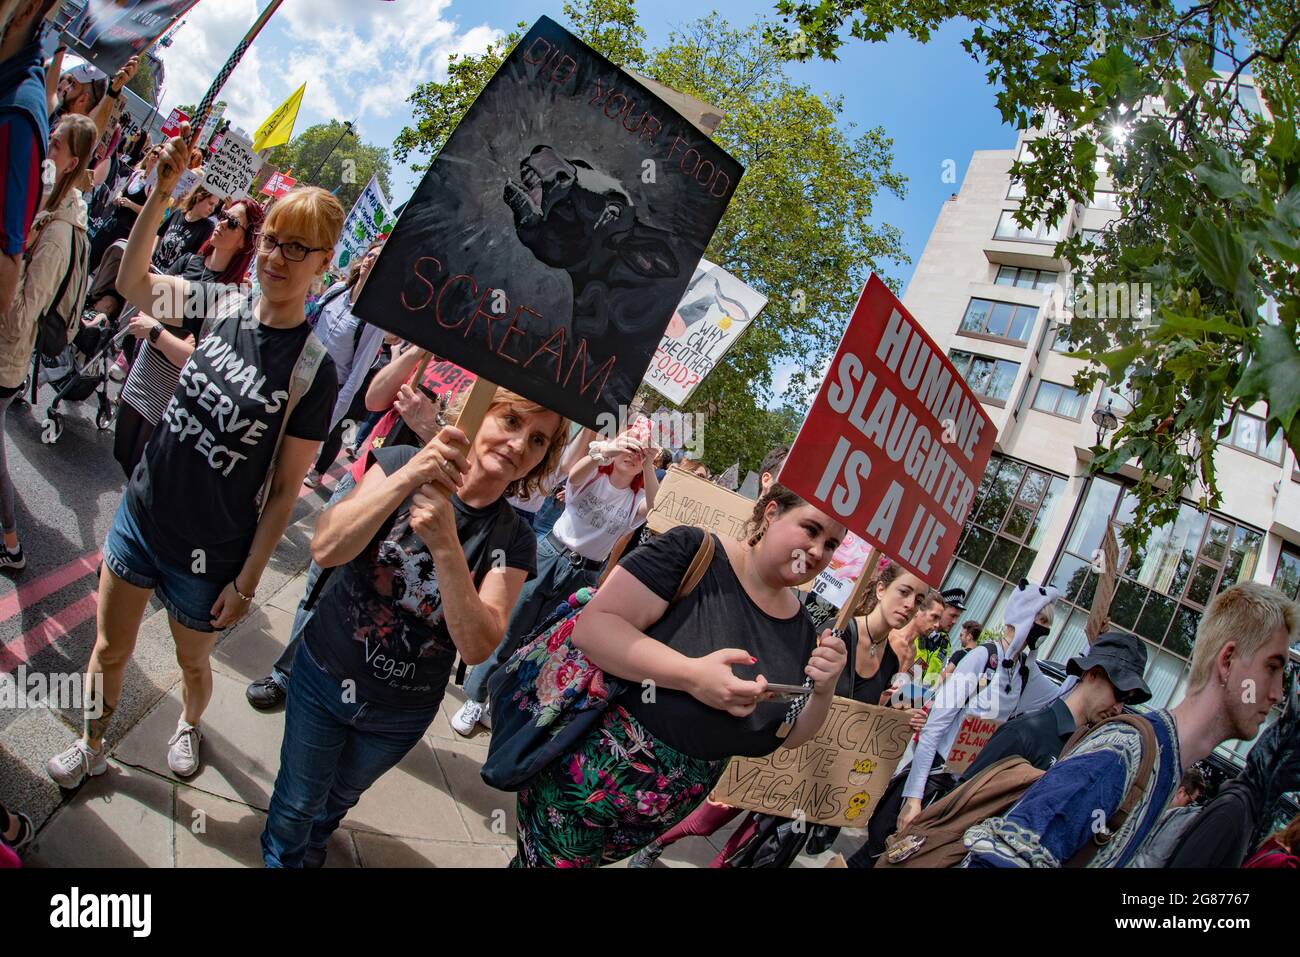 The Official Animal Rights March London 2019.  Activists marching through UK’s capital city on 17th August 2019. Humane Slaughter Is A Lie. Stock Photo